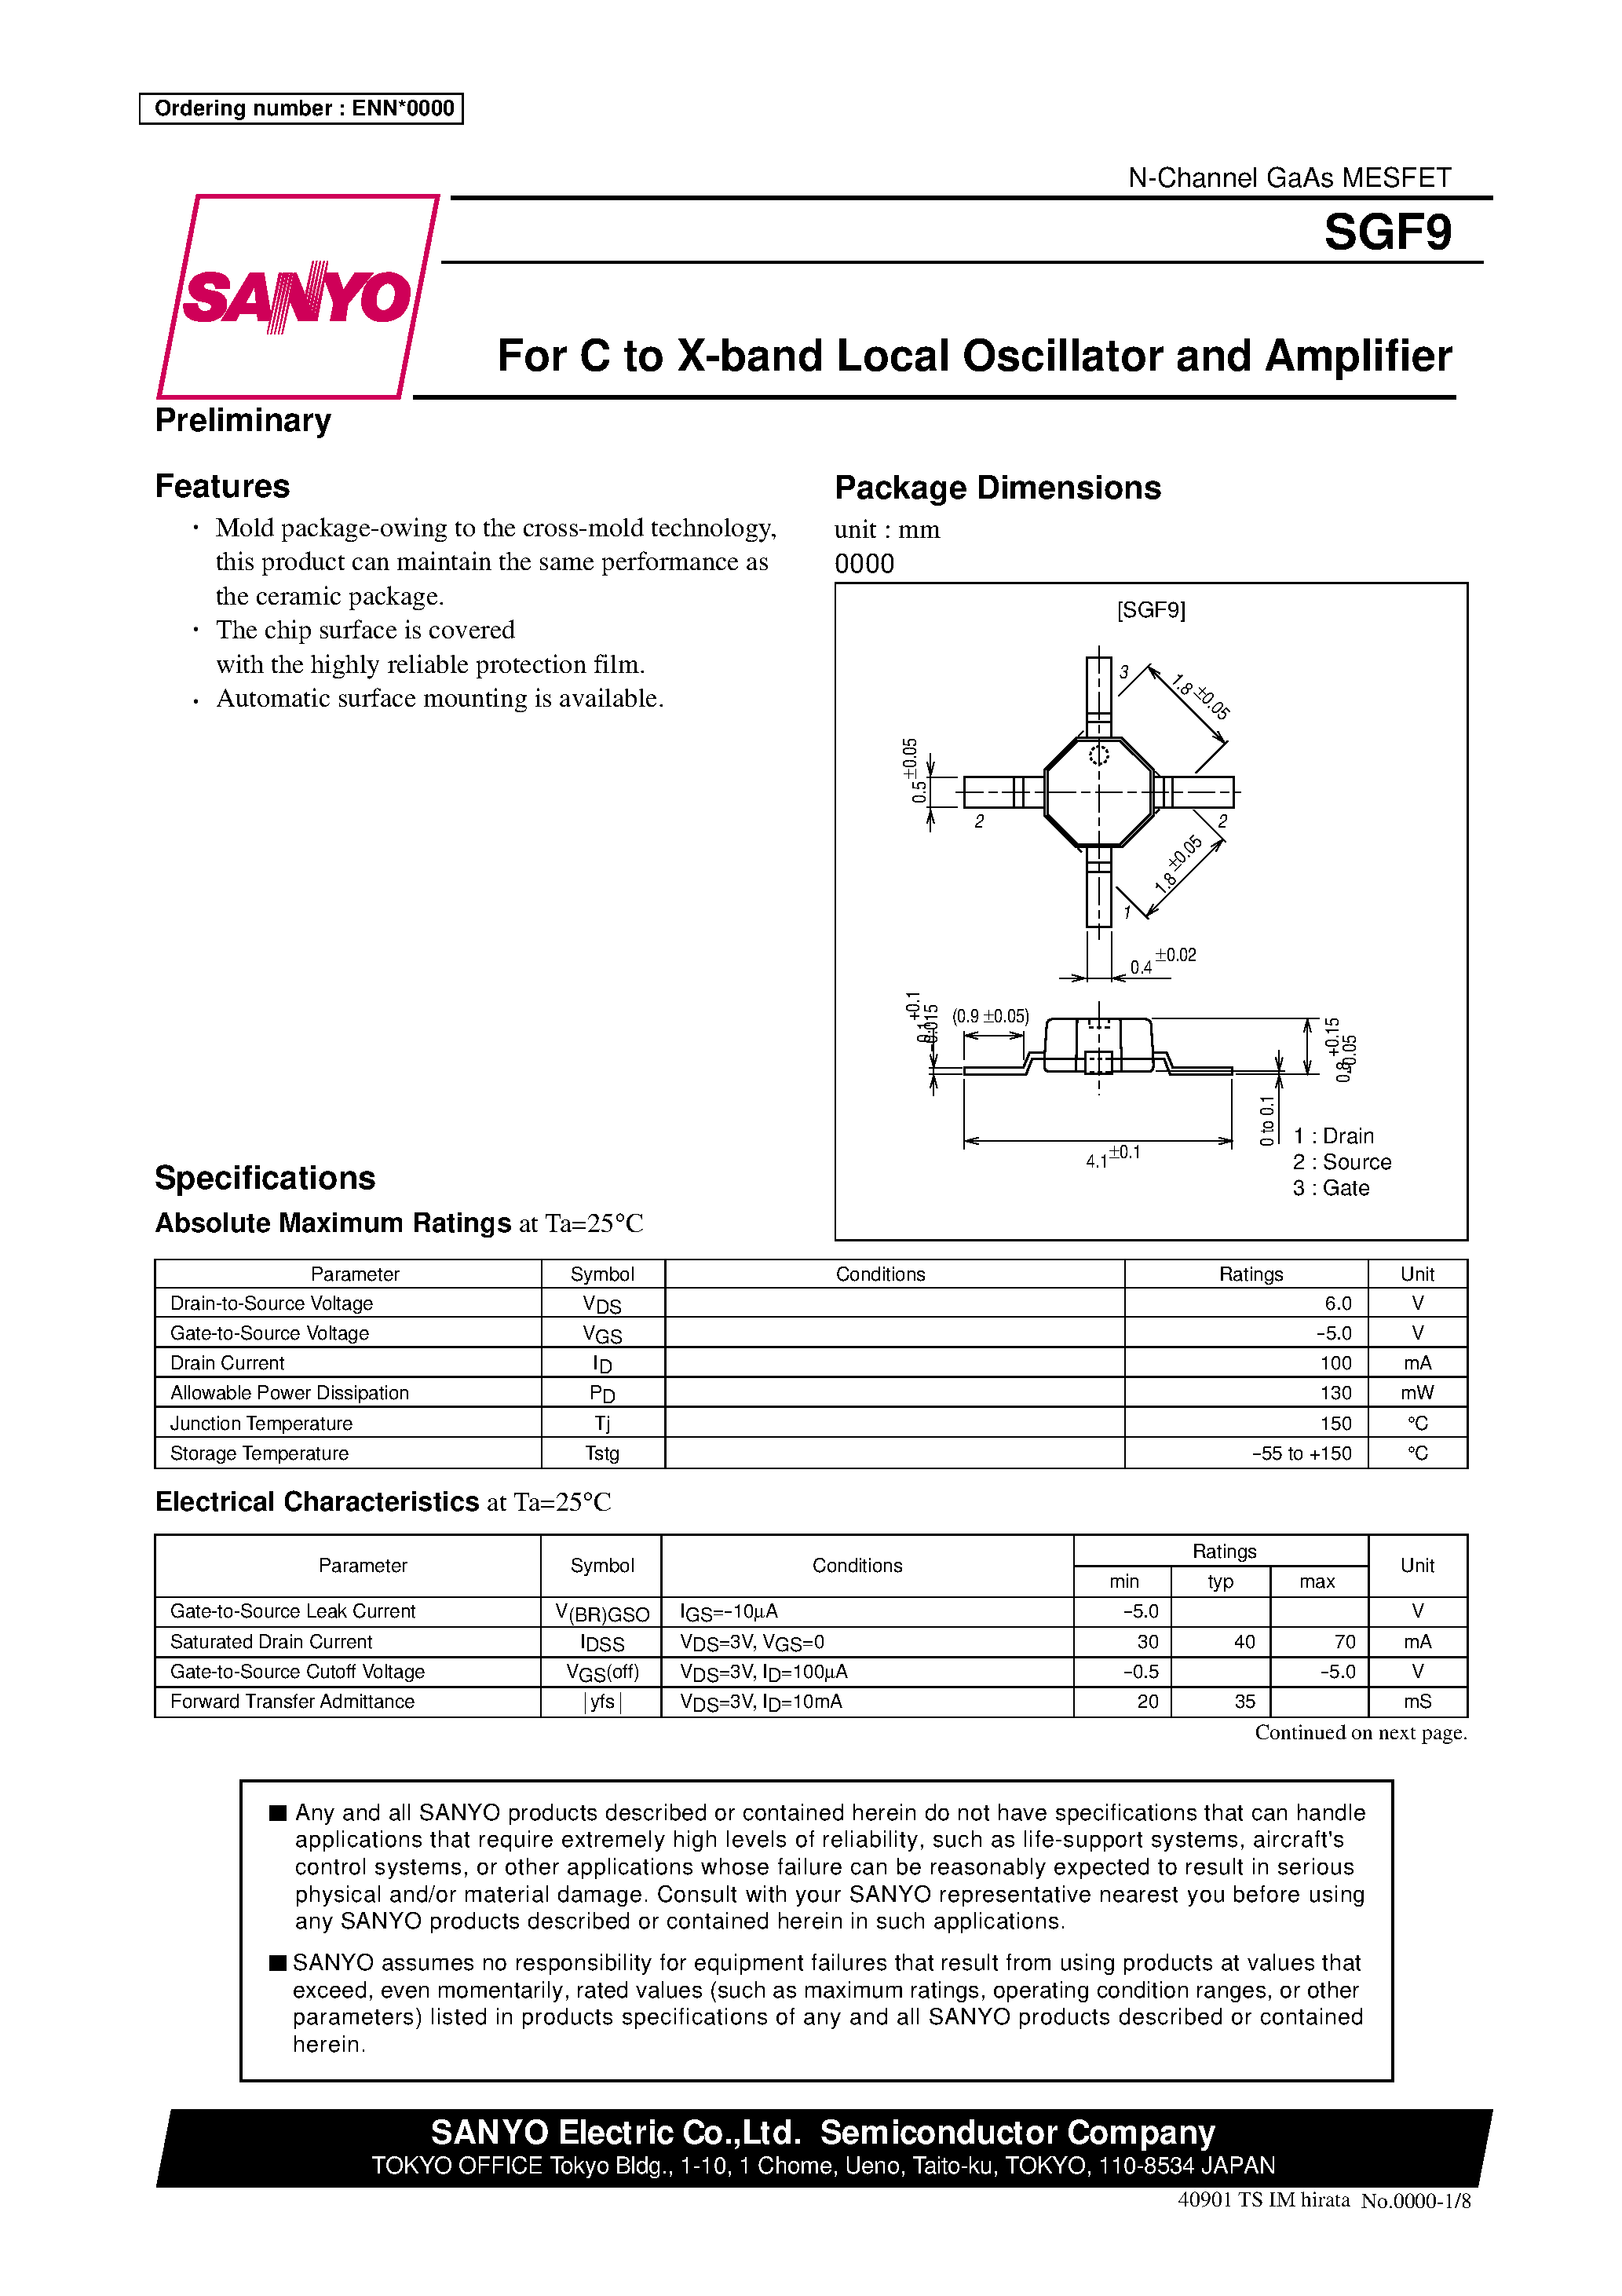 Datasheet SGF9 - For C to X-band Local Oscillator and Amplifier page 1